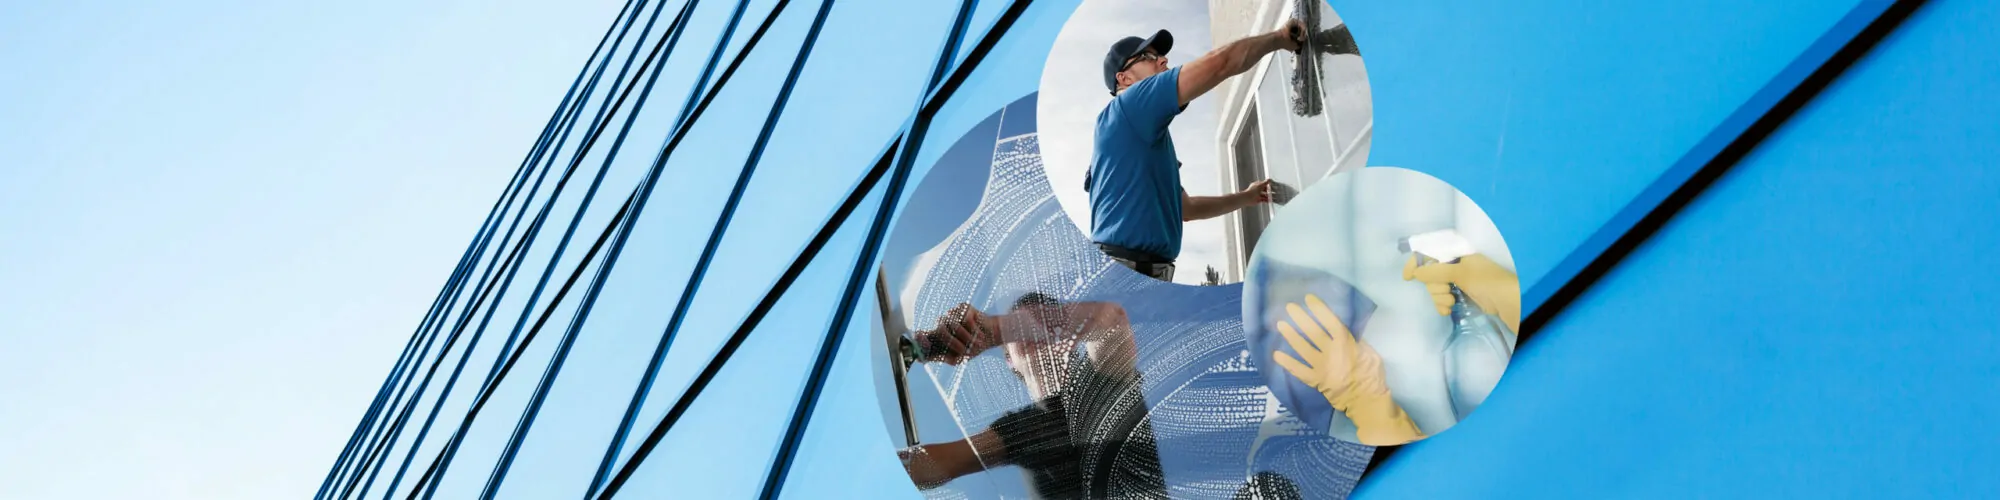 Image of a man cleaning the windows of a building, in the background a glass facade, valantic industries: service industry